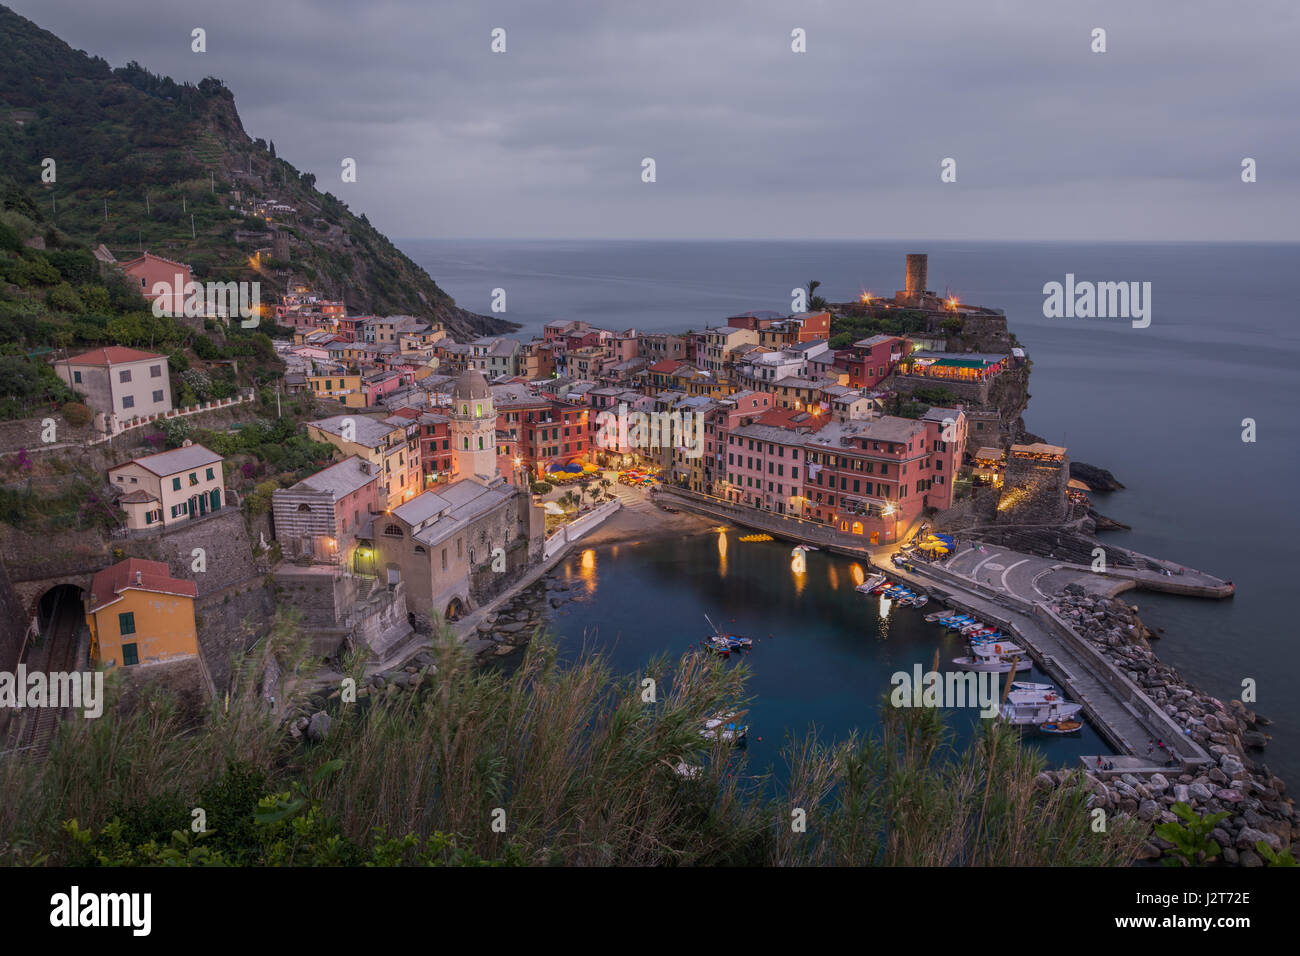 The village of Vernazza in the Cinque Terre in Liguria, Italy set against a cloudy grey sky at dusk Stock Photo